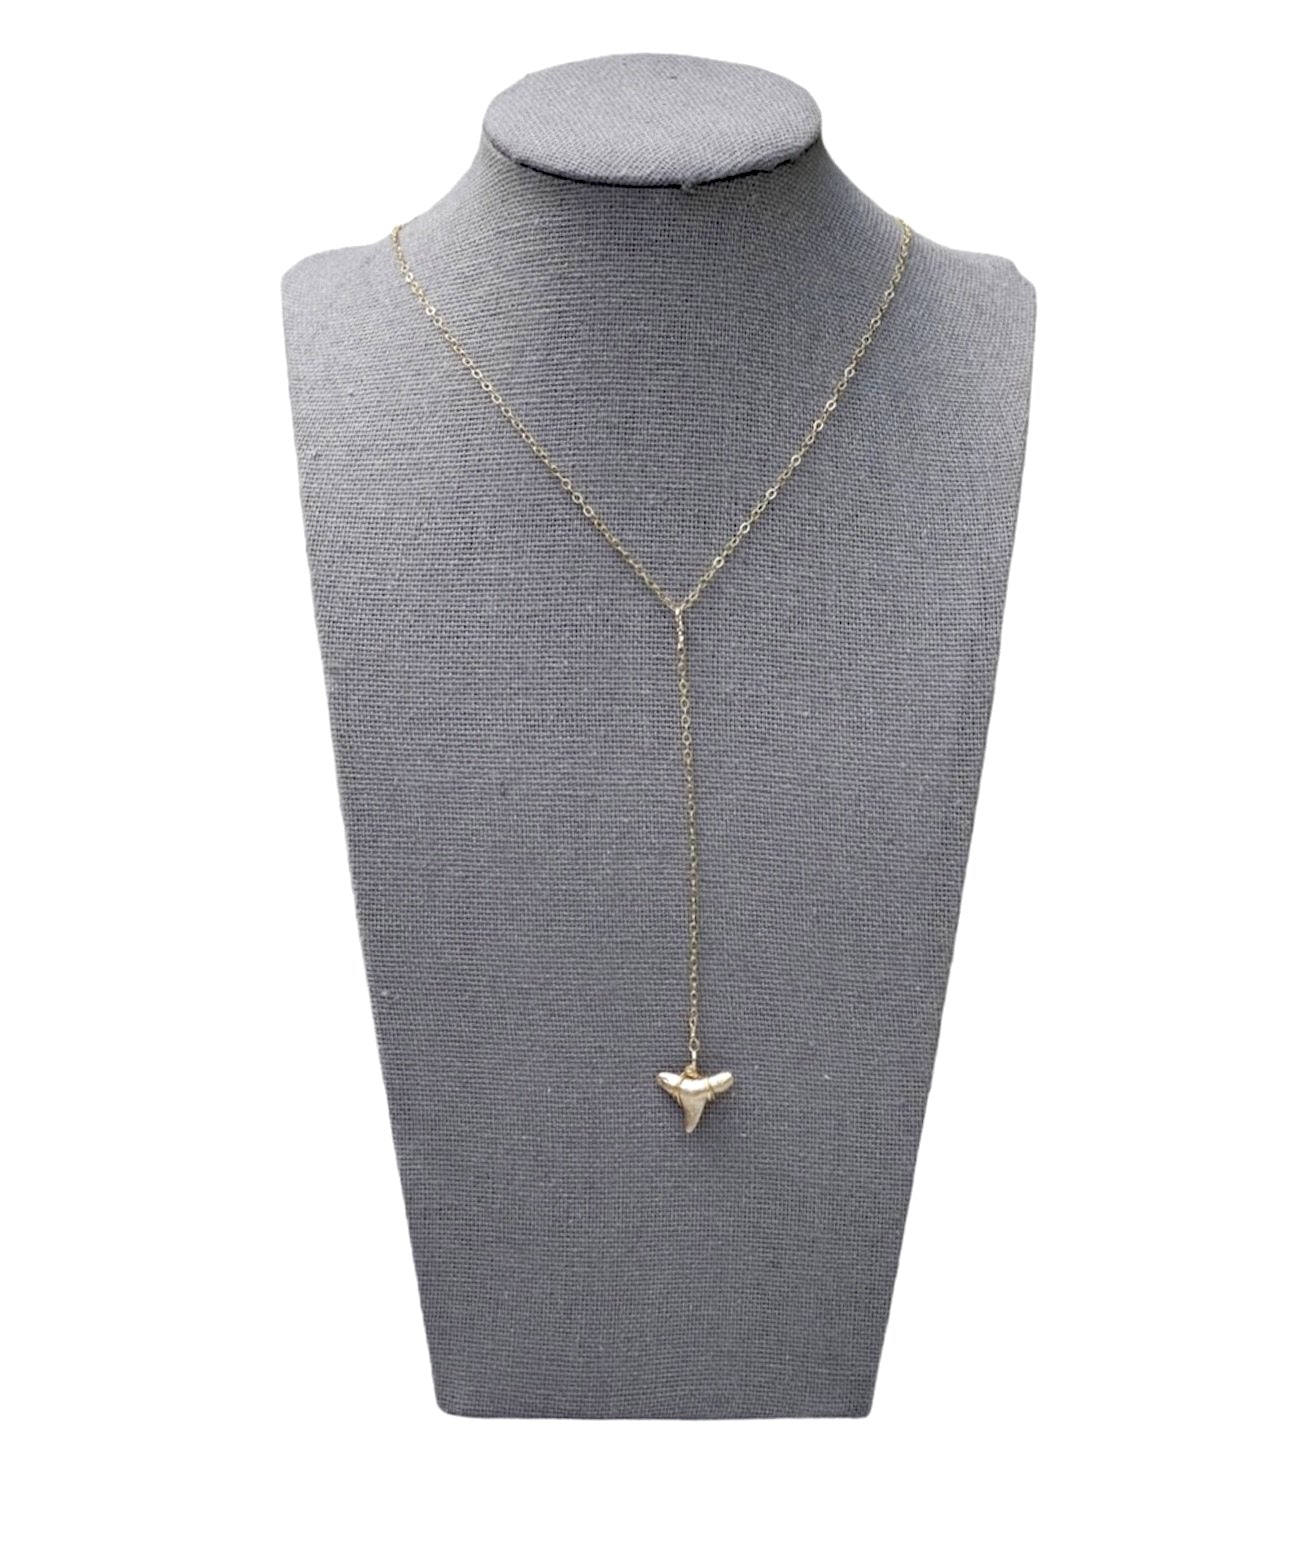 luxury gold shark tooth y necklace-real shark tooth necklace dainty ethically collected fossilized shark teeth - Foxy Fossils